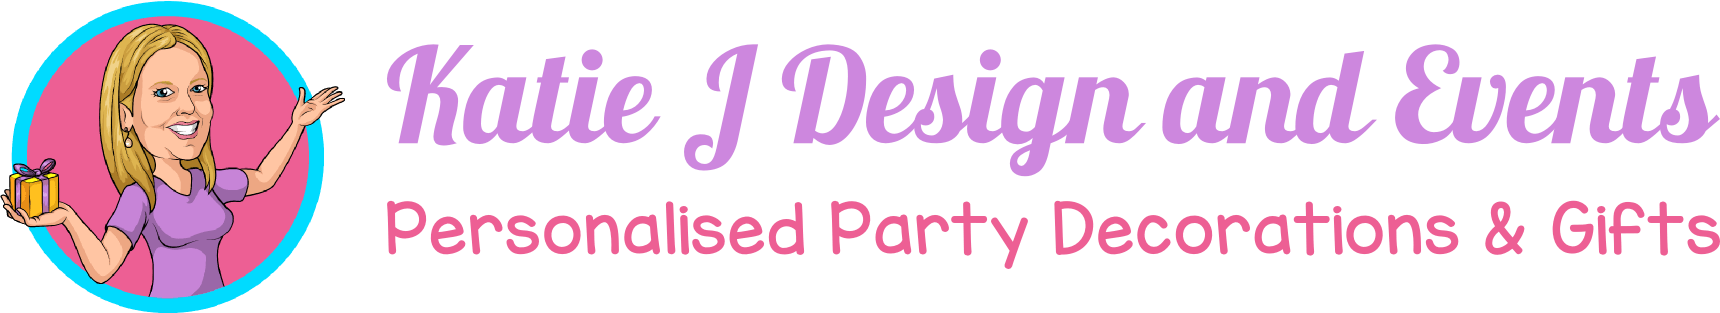 Katie J Design and Events Logo